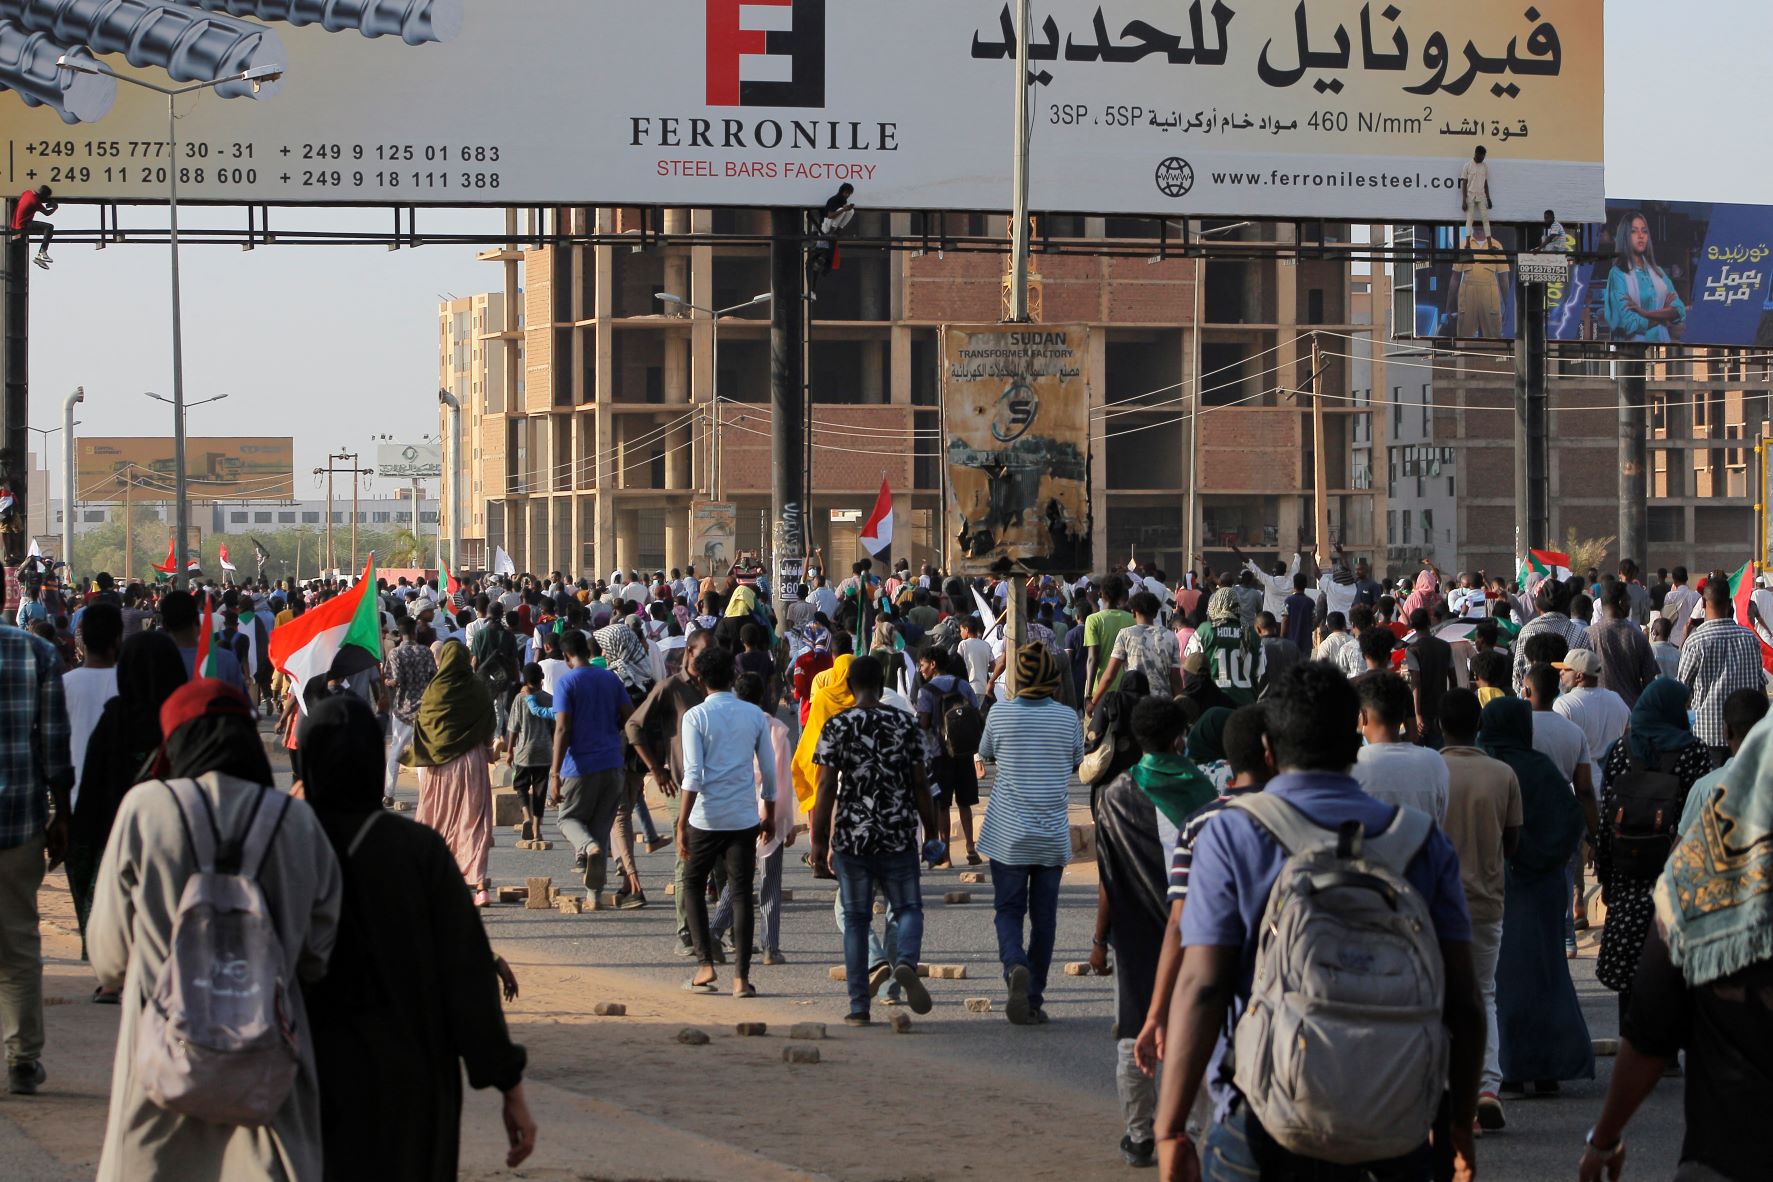 Sudanese protesters take part in a rally against military rule on the anniversary of previous popular uprisings, in the capital Khartoum on April 6, 2022 (AFP)